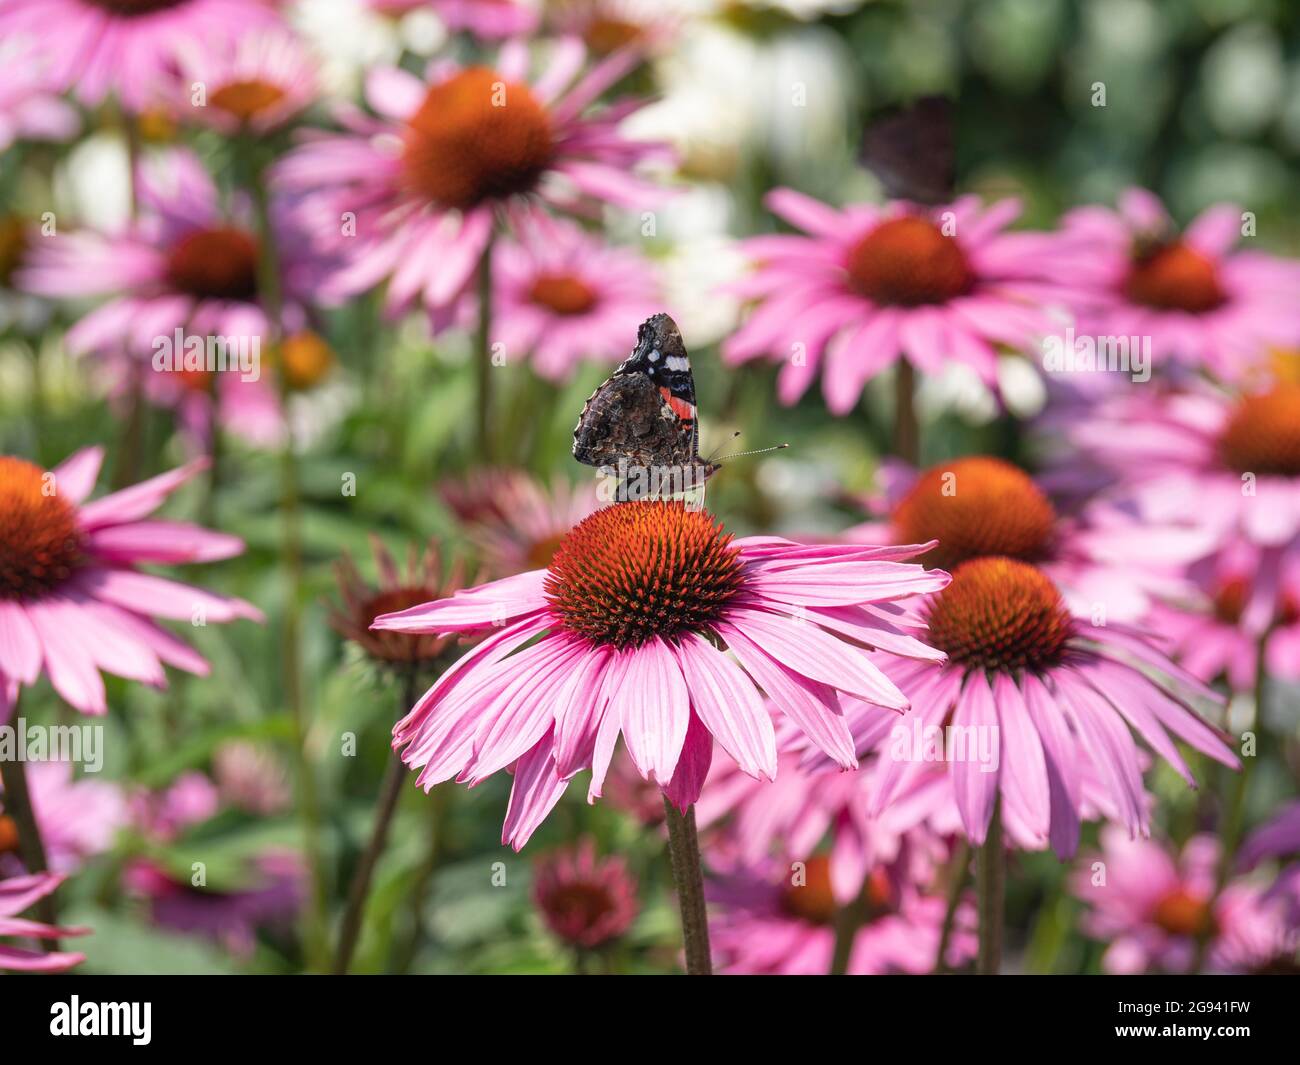 The Vanessa atalanta or the admiral butterfly sitting on a flower called the Coneflower, or latin name the Echinacea purpurea Stock Photo